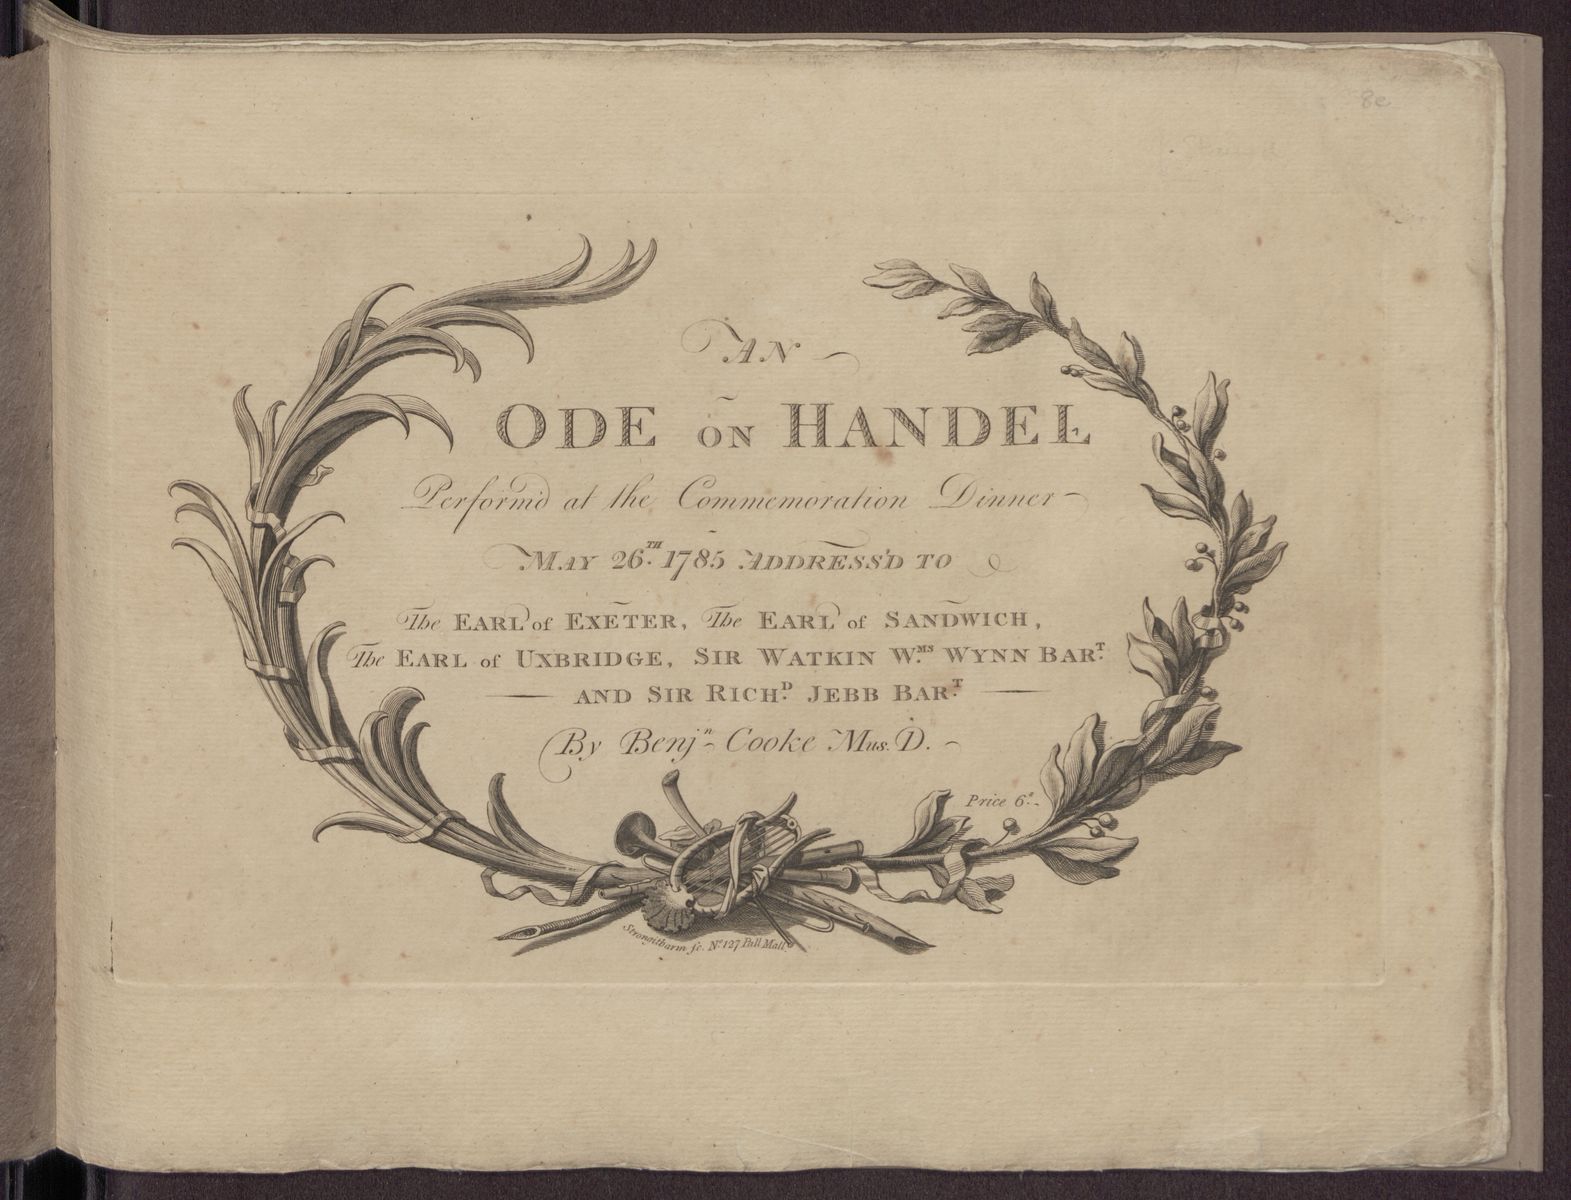 An Ode on Handel : Perform’d at the Commemoration Dinner, May 26th. 1785 Adress’d to The Earl of Exeter, The Earl of Sandwich, The Earl of Uxbridge, Sir Watkin  (Stiftung Händel-Haus Halle CC BY-NC-SA)